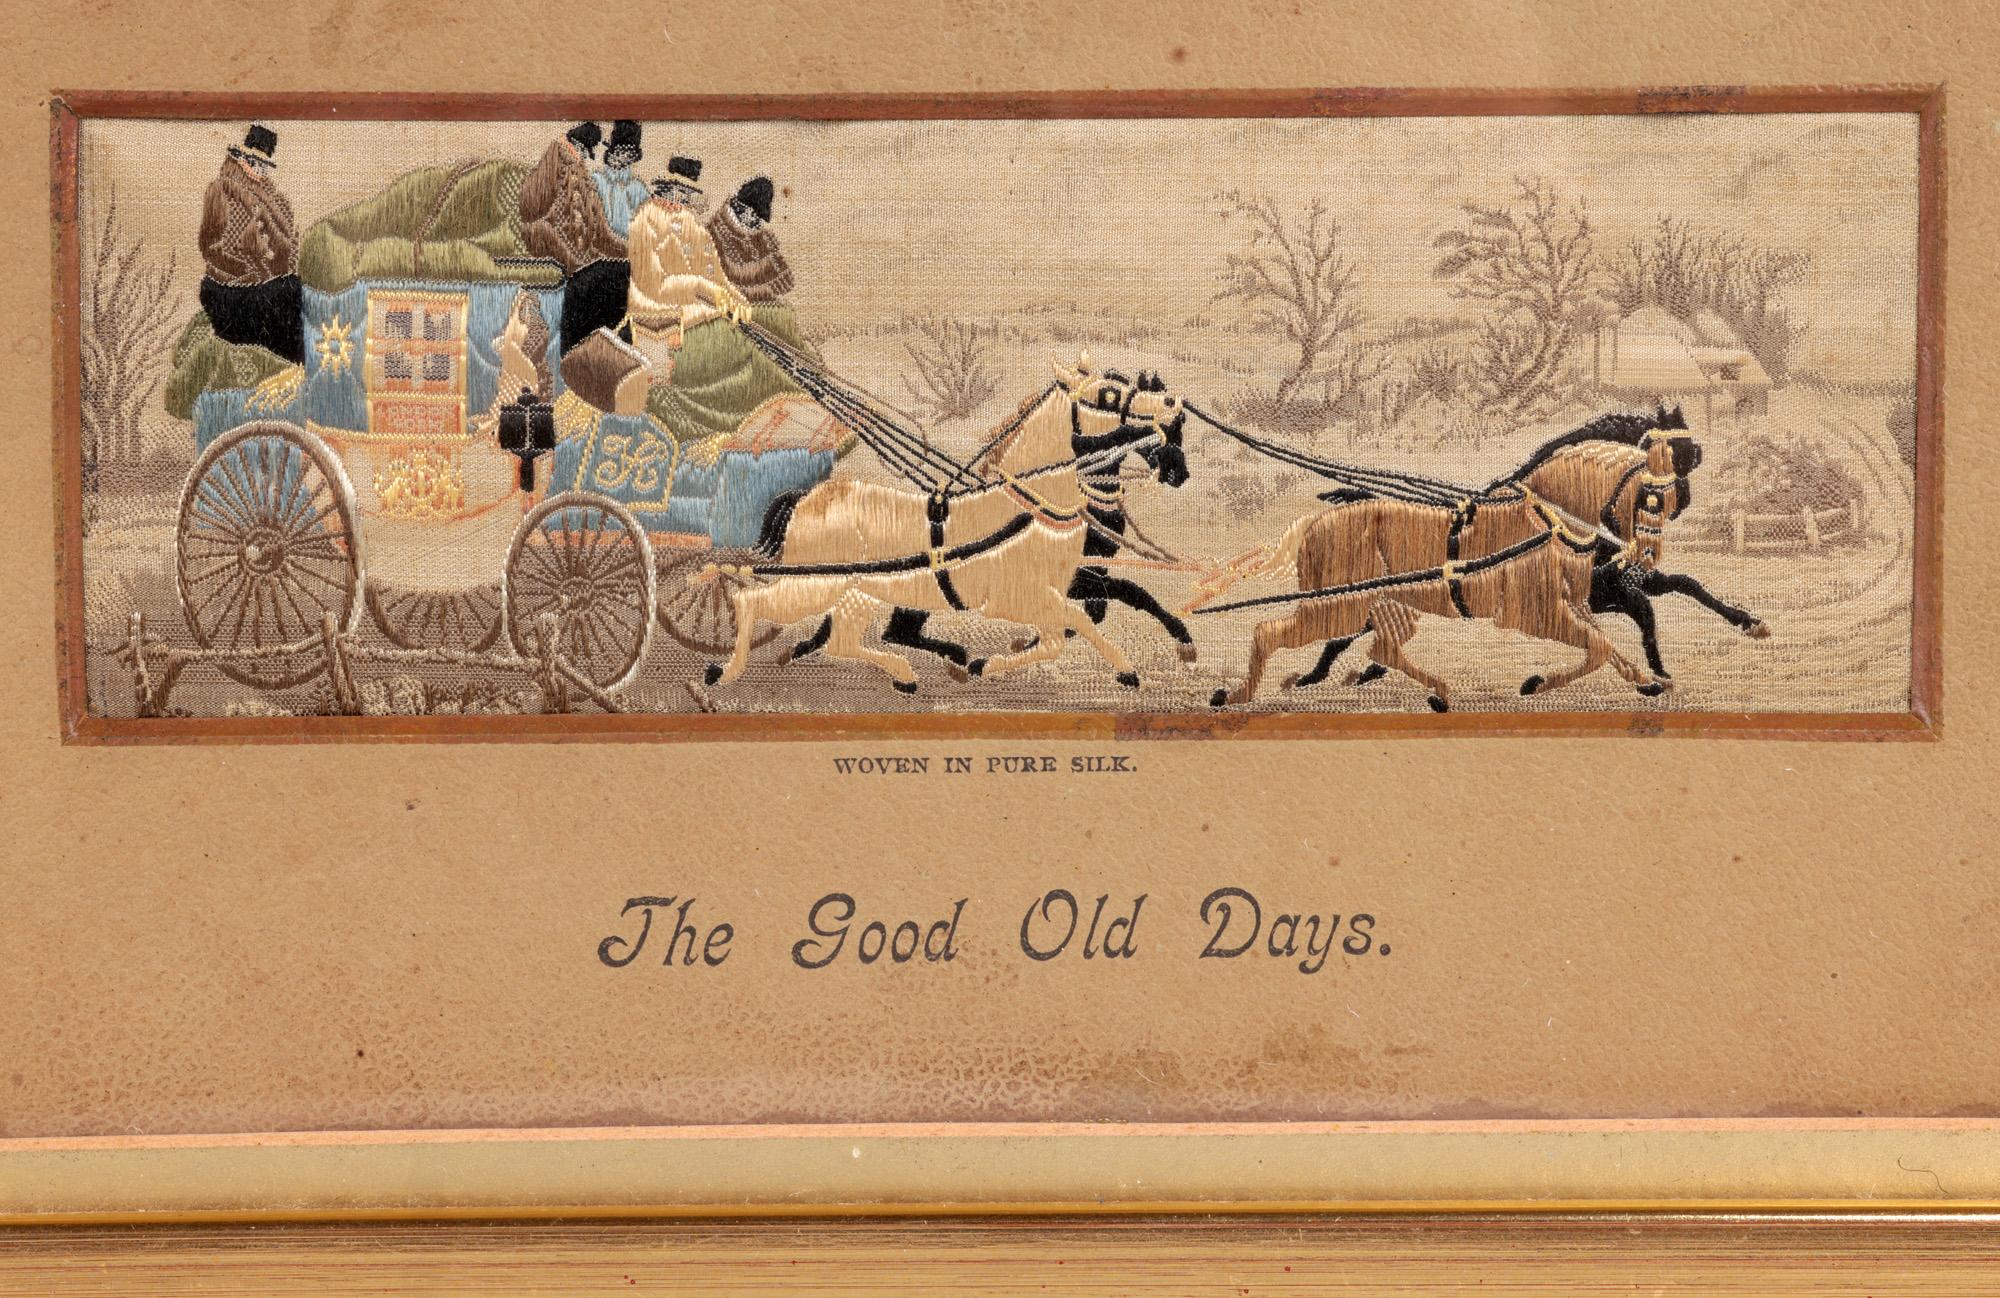 A fine pair framed silk Stevengraphs, one titled The Present Time and the other The Good Old Days, by  Thomas Stevens and dating from 1875. The rectangular silk sewn panels portray two forms on transport, a horse drawn stagecoach (The Good Old Days)